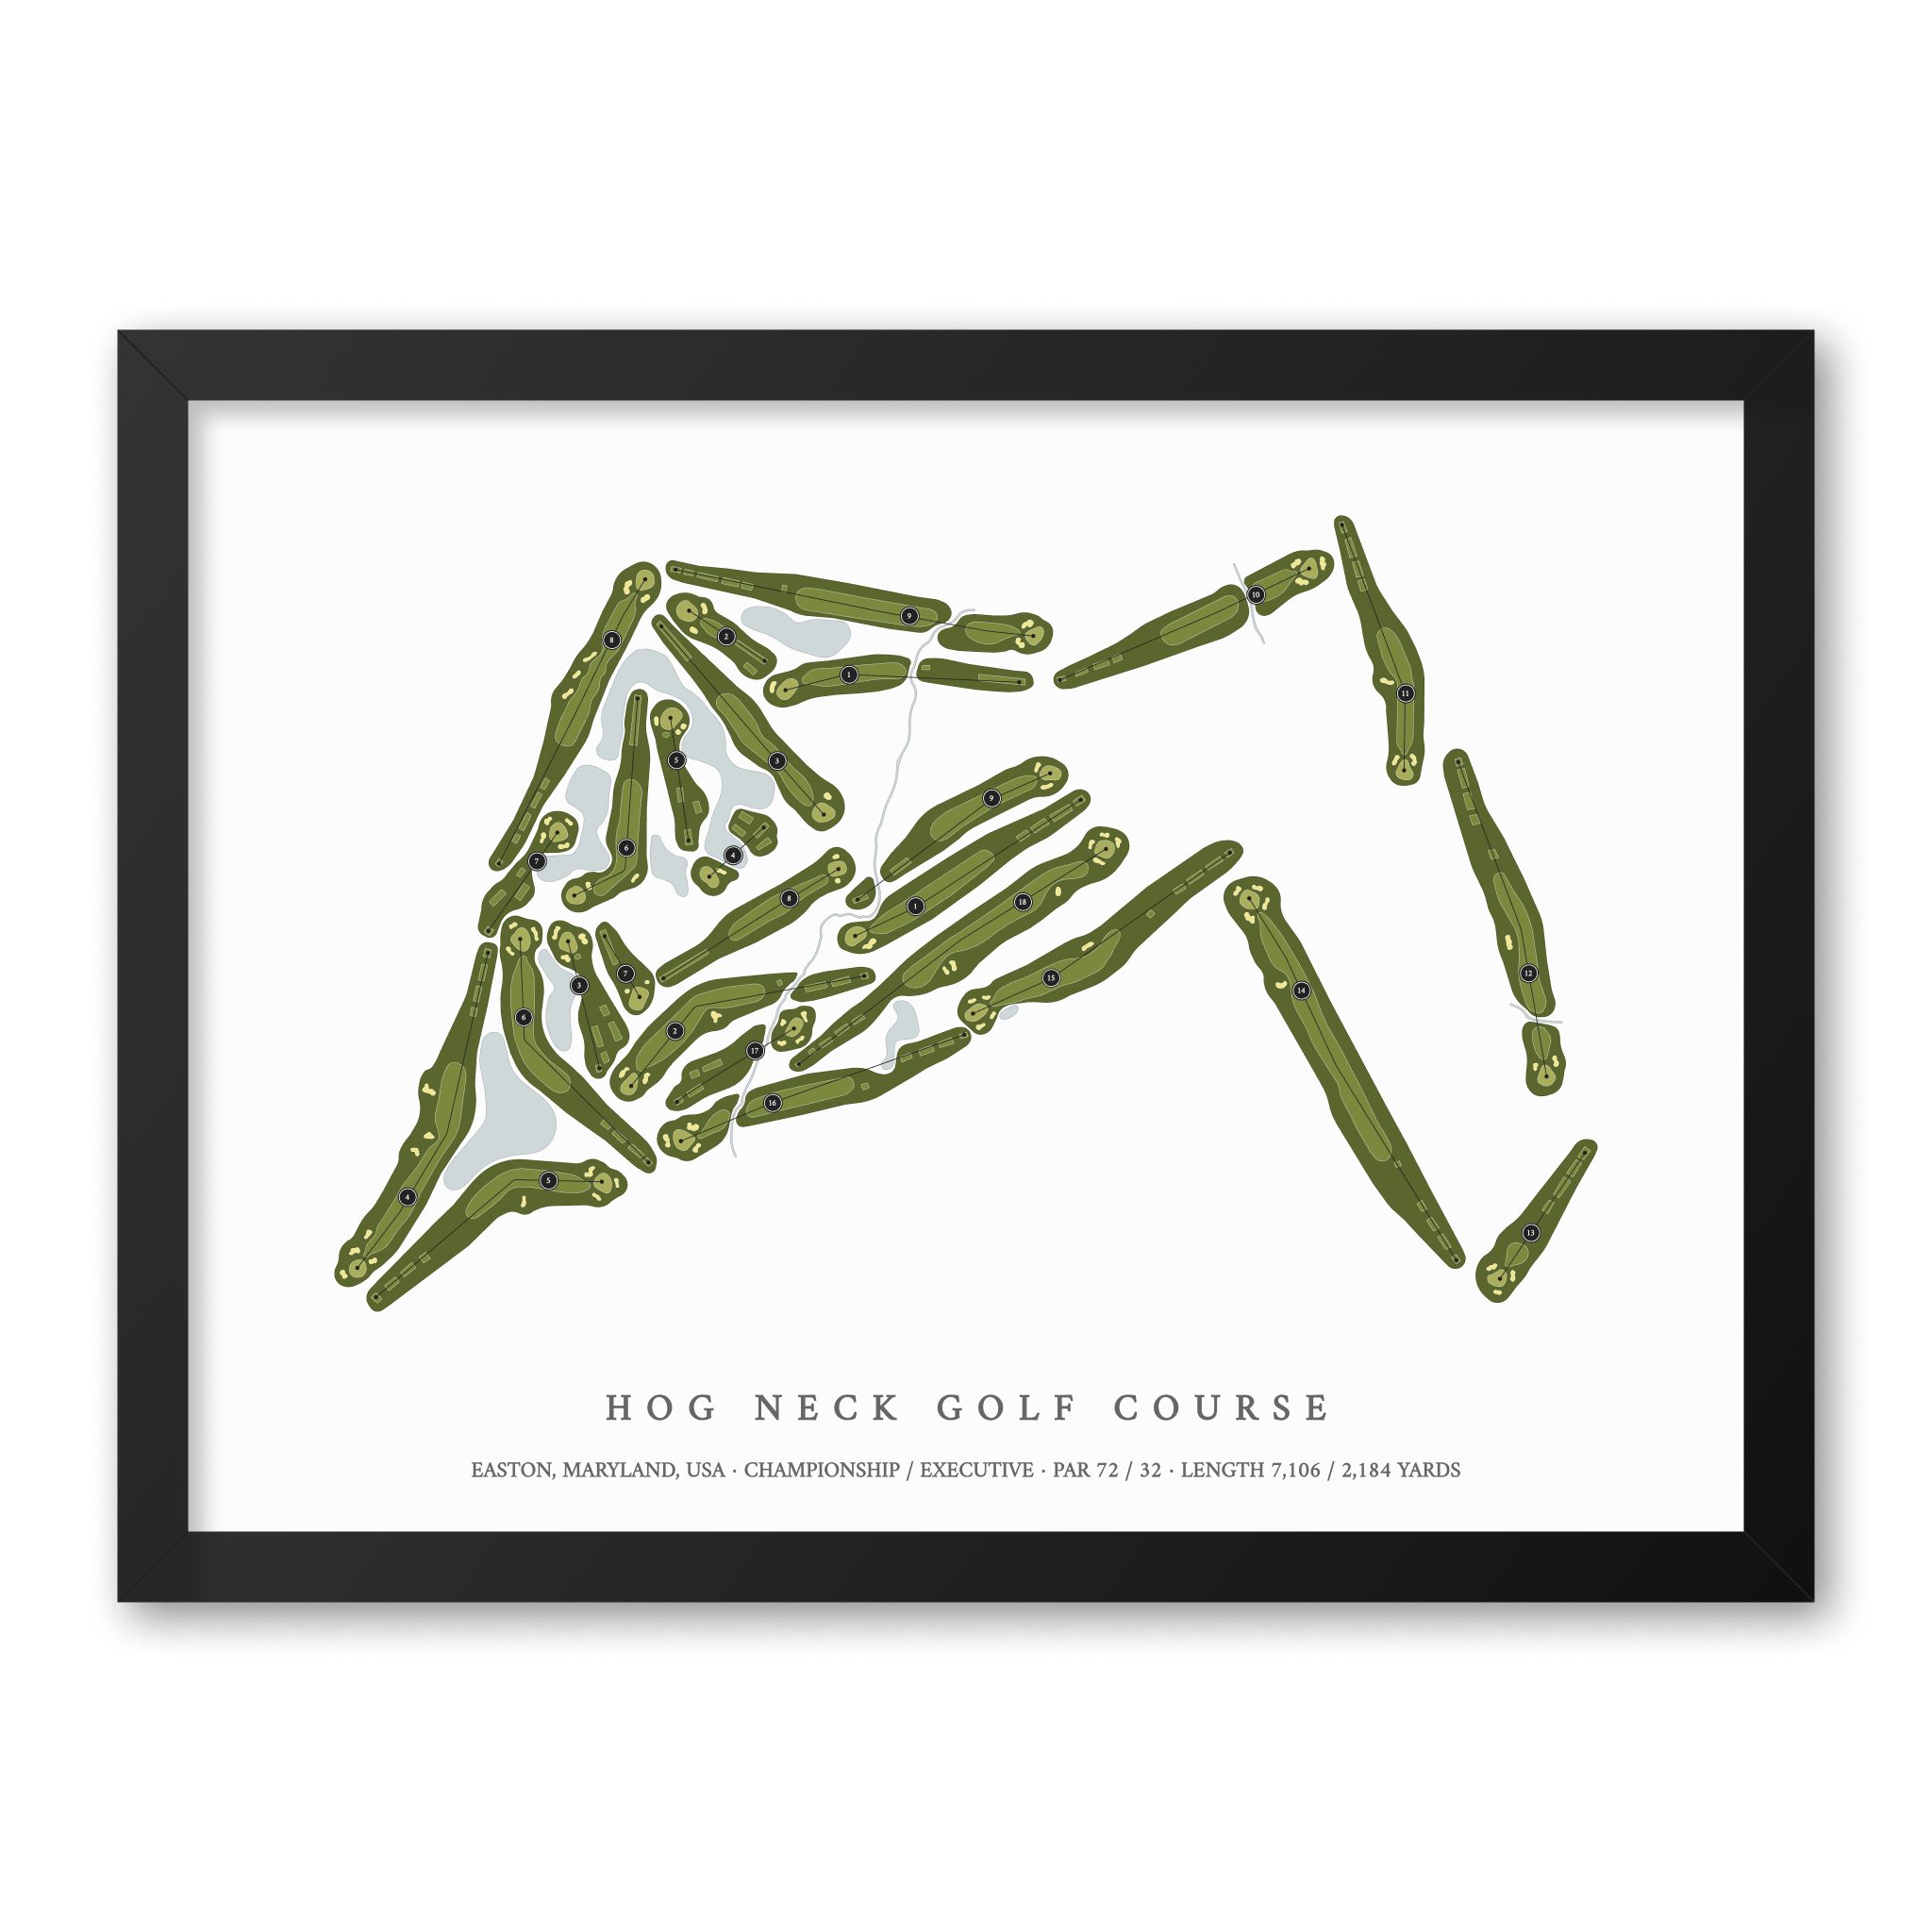 Hog Neck Golf Course | Golf Course Map | Black Frame With Hole Numbers #hole numbers_yes